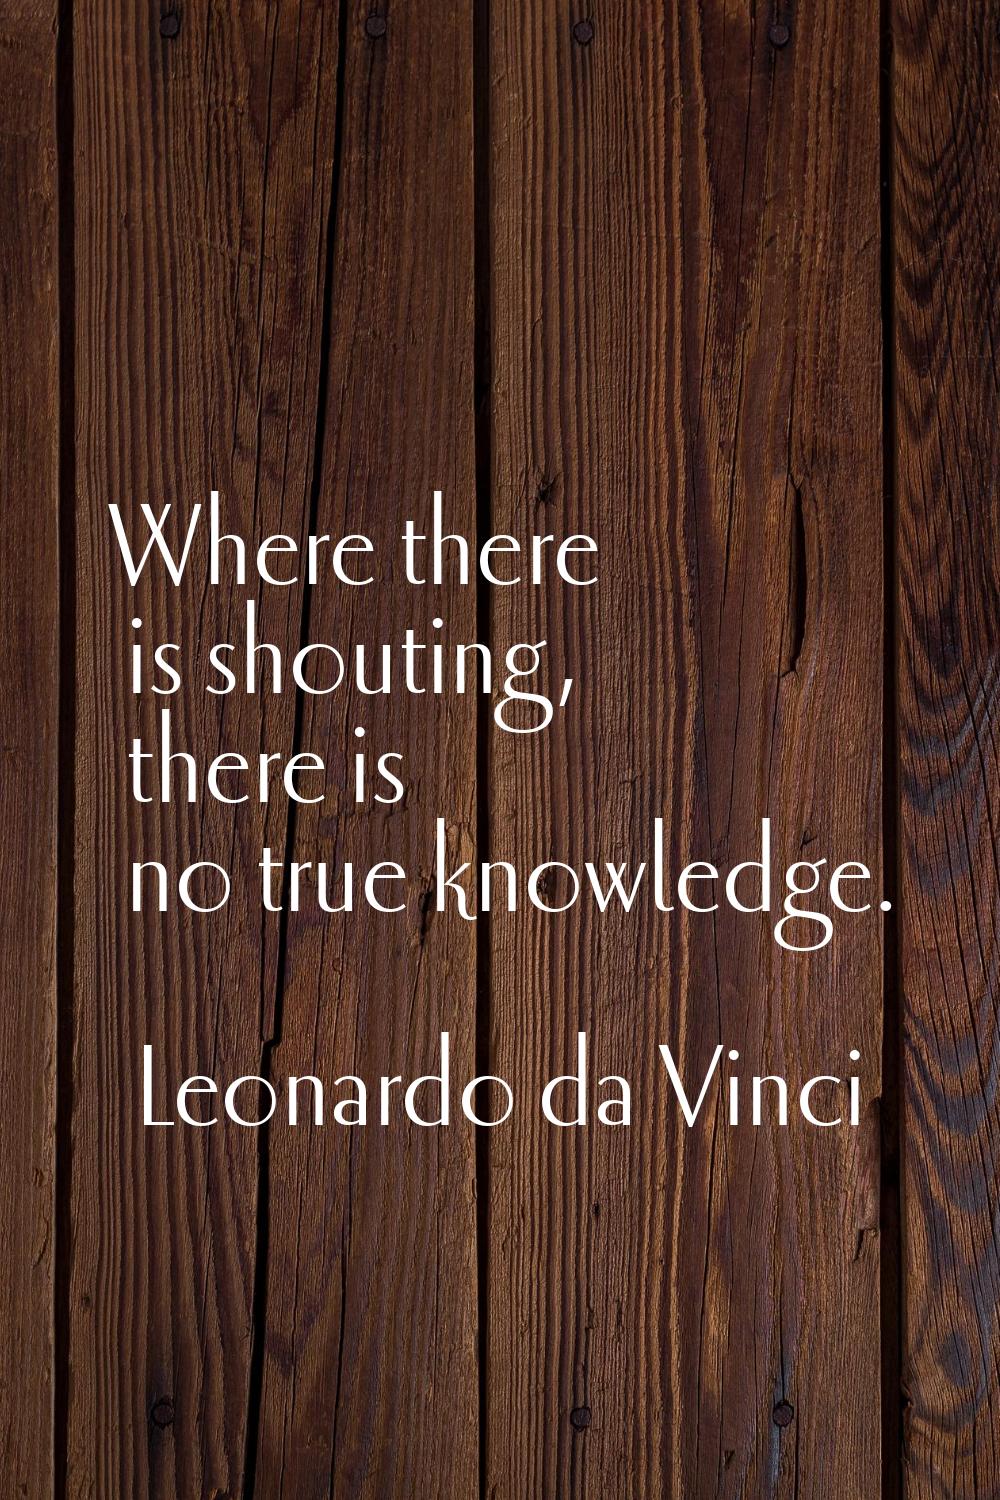 Where there is shouting, there is no true knowledge.